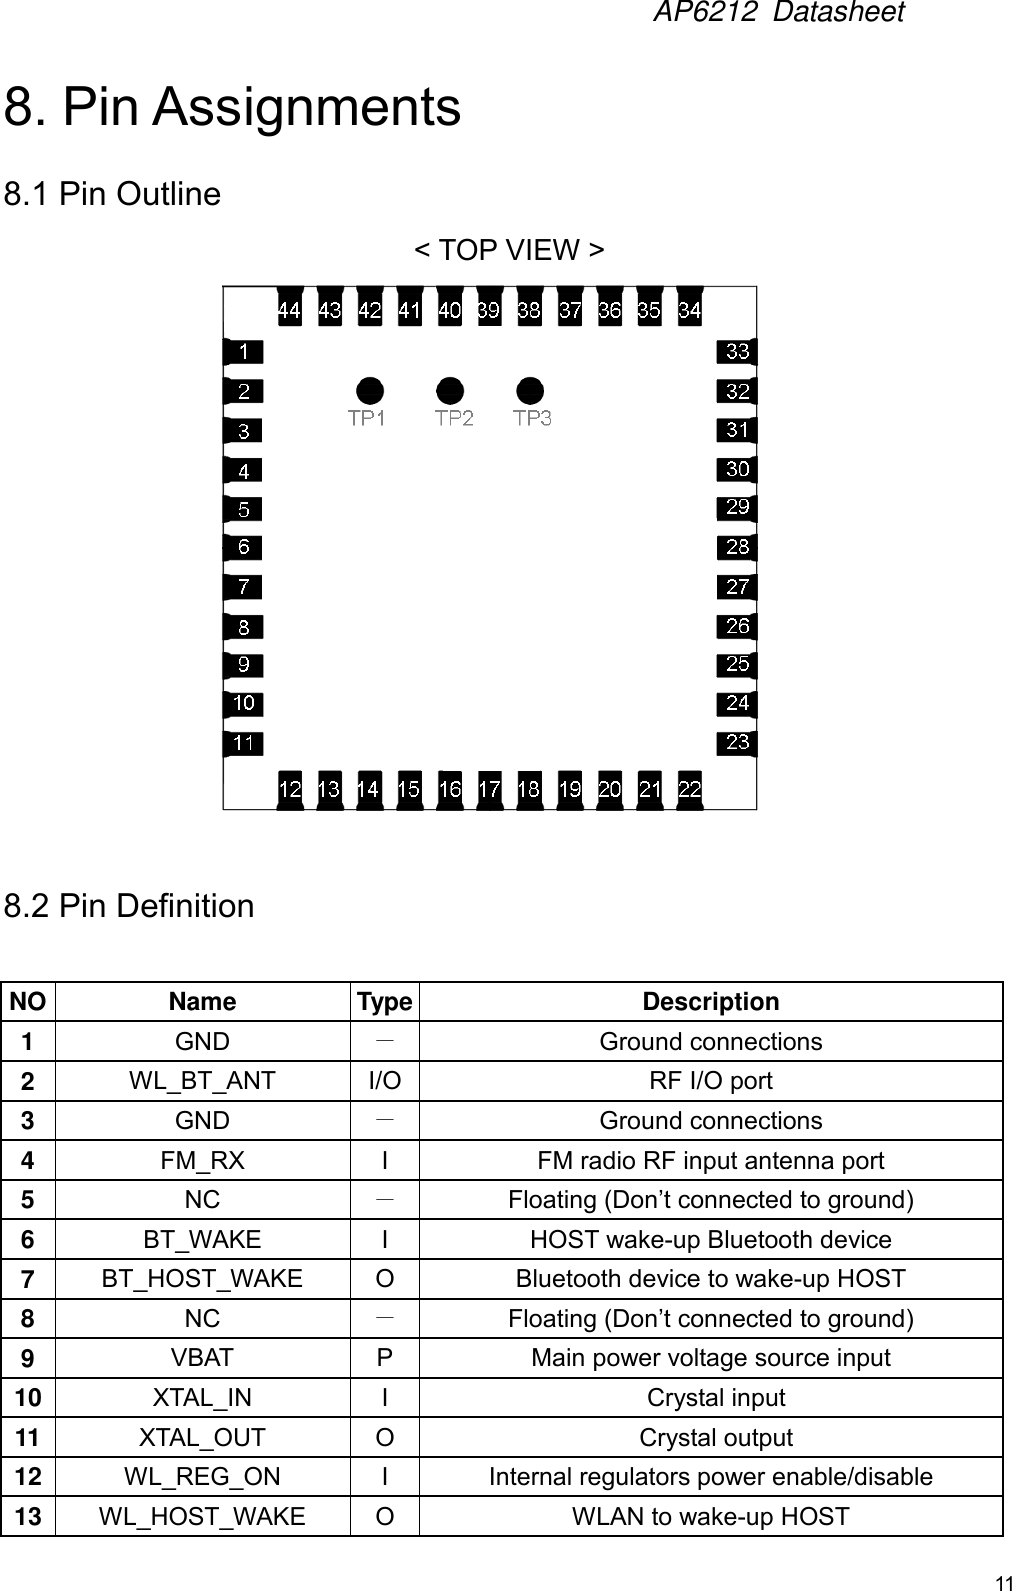 AP6212  Datasheet11 8. Pin Assignments8.1 Pin Outline &lt; TOP VIEW &gt; 8.2 Pin Definition NO Name Type Description 1 GND － Ground connections 2 WL_BT_ANT I/O RF I/O port 3 GND － Ground connections 4 FM_RX I FM radio RF input antenna port 5 NC － Floating (Don’t connected to ground) 6 BT_WAKE I HOST wake-up Bluetooth device 7 BT_HOST_WAKE O Bluetooth device to wake-up HOST 8 NC － Floating (Don’t connected to ground) 9 VBAT P Main power voltage source input 10 XTAL_IN I Crystal input 11 XTAL_OUT O Crystal output 12 WL_REG_ON I Internal regulators power enable/disable 13 WL_HOST_WAKE O WLAN to wake-up HOST 